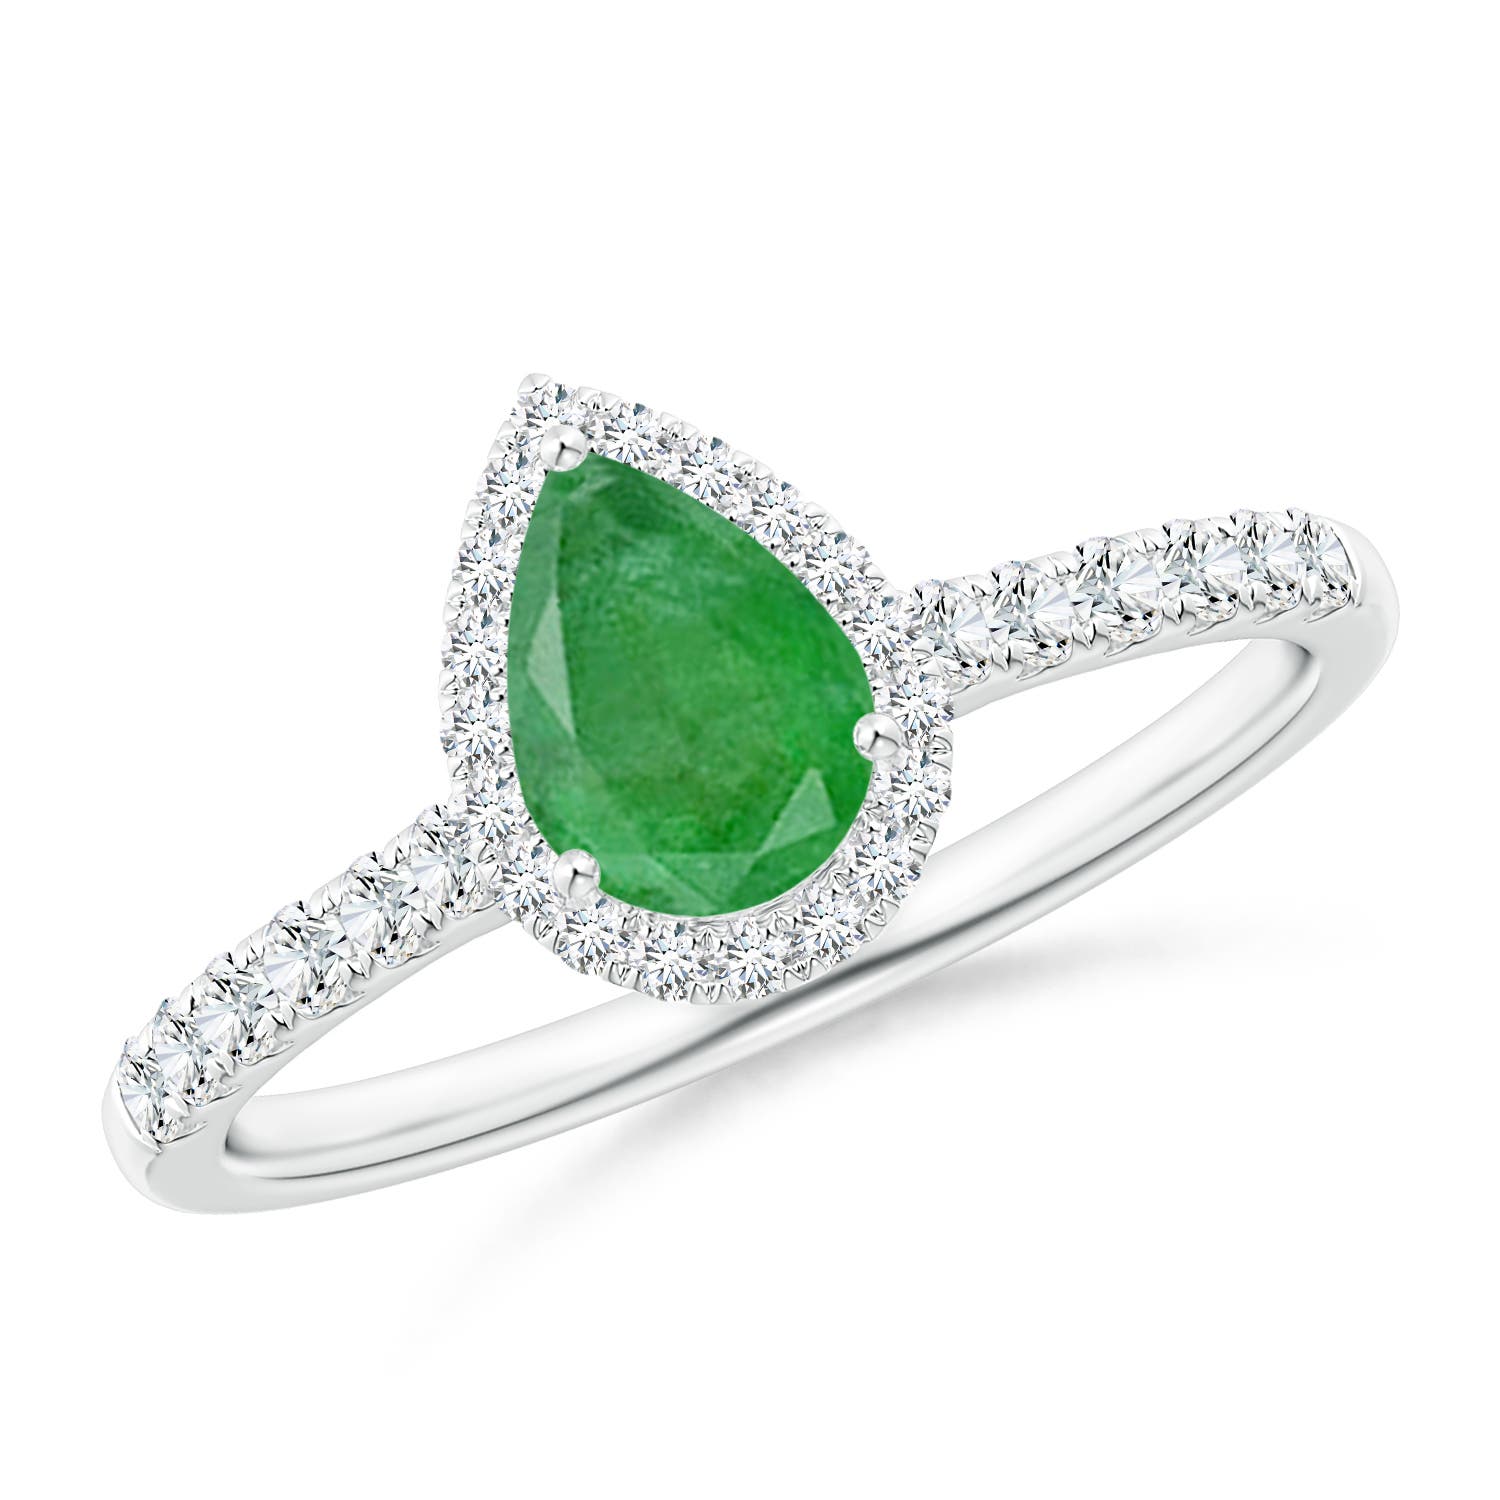 A - Emerald / 0.88 CT / 14 KT White Gold